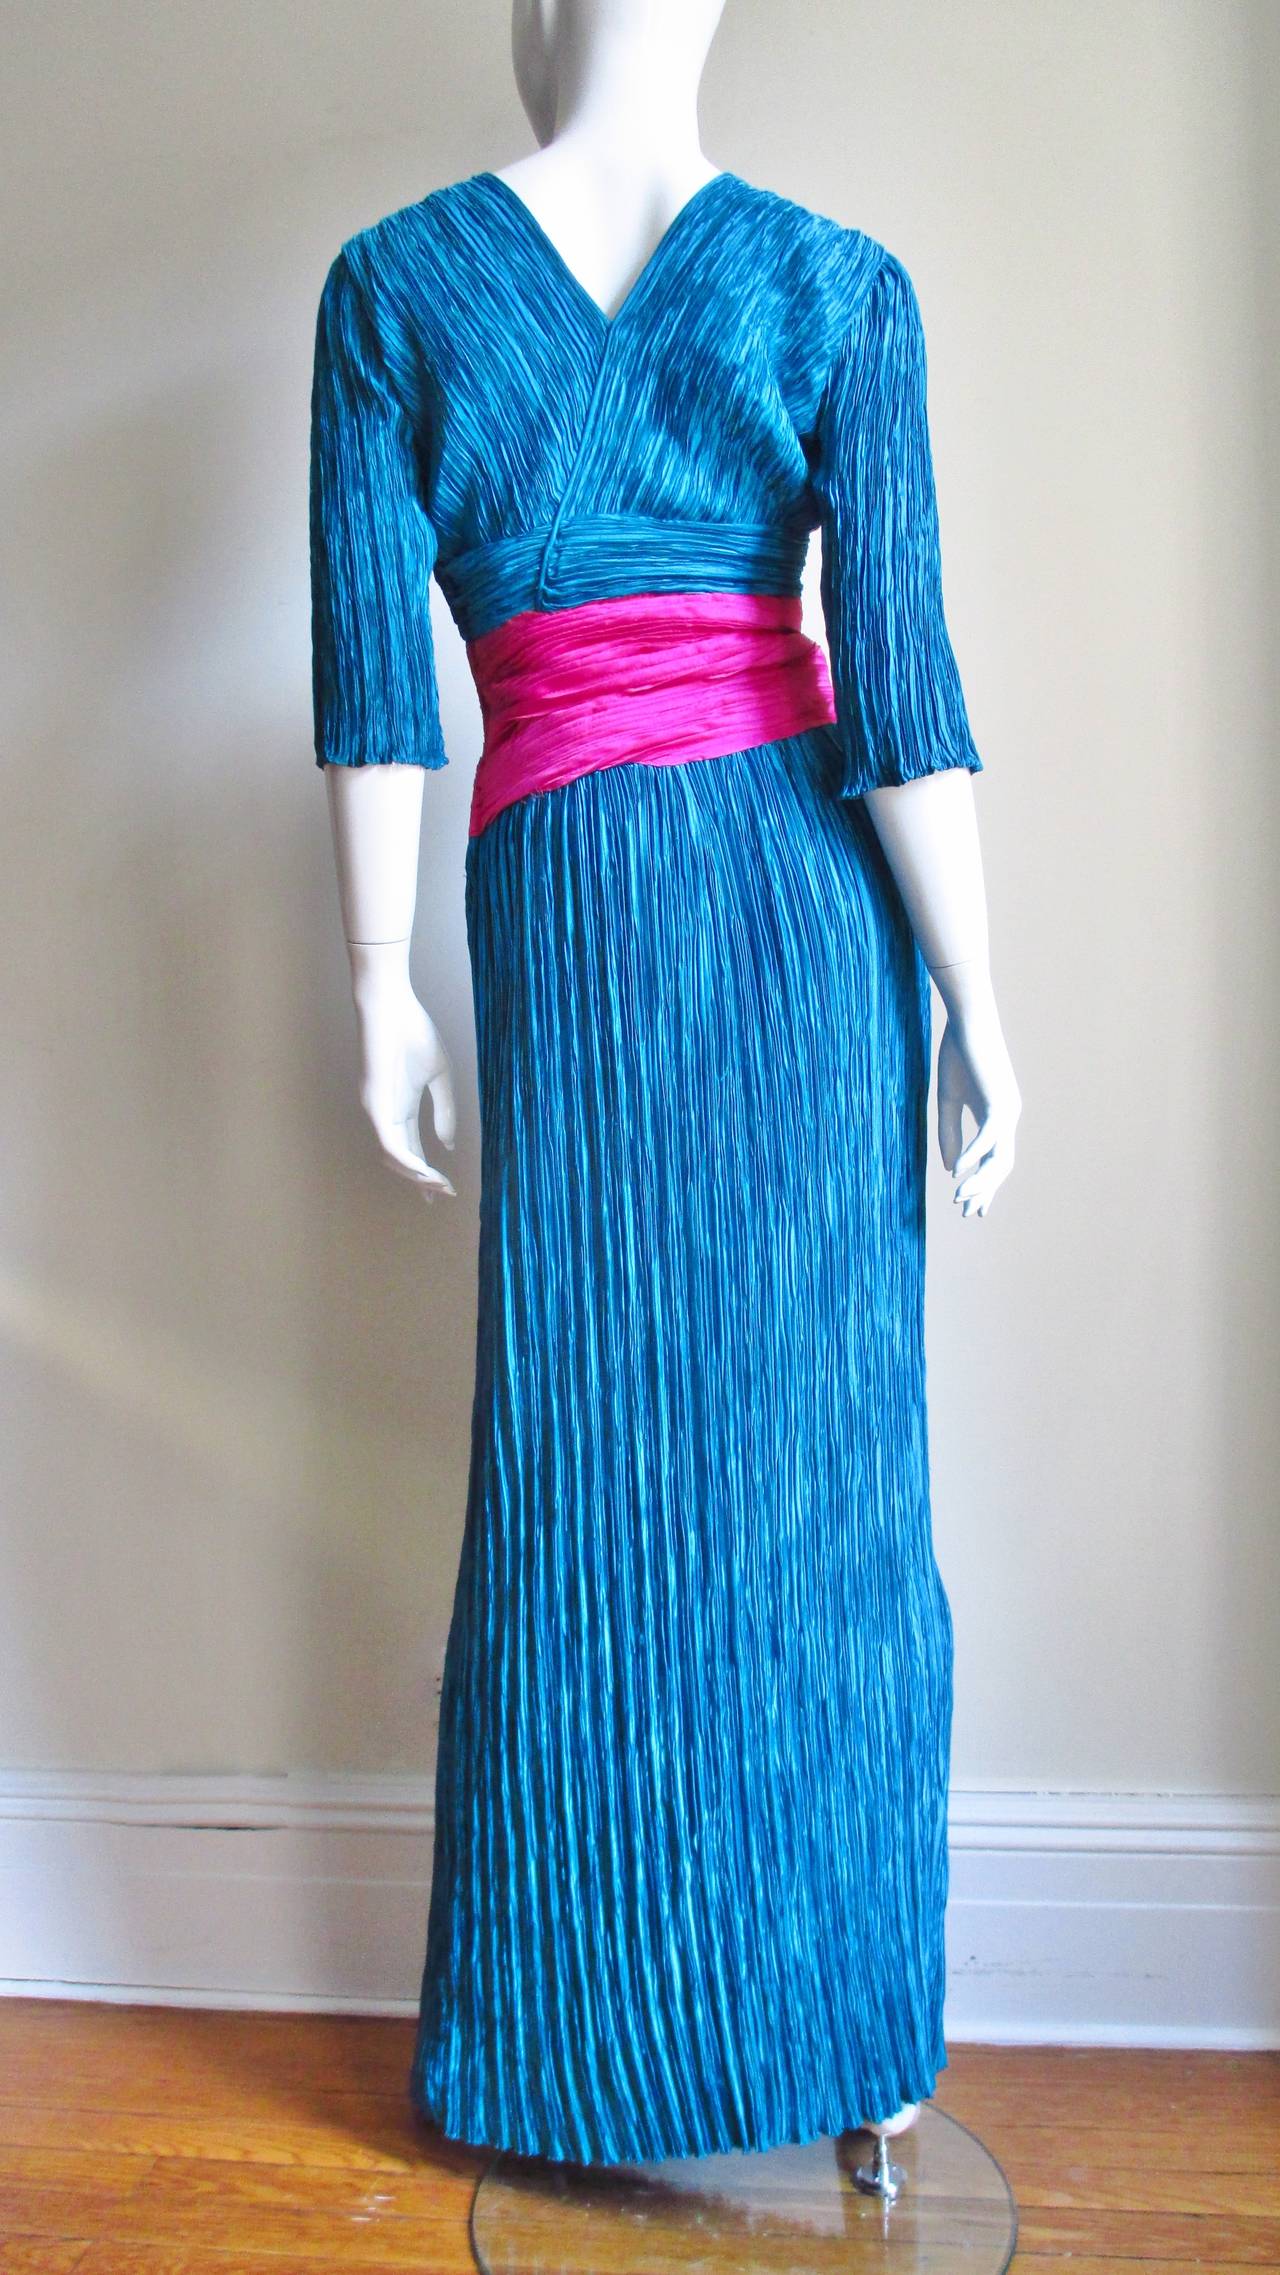  Mary McFadden Couture Color Block Gown  2